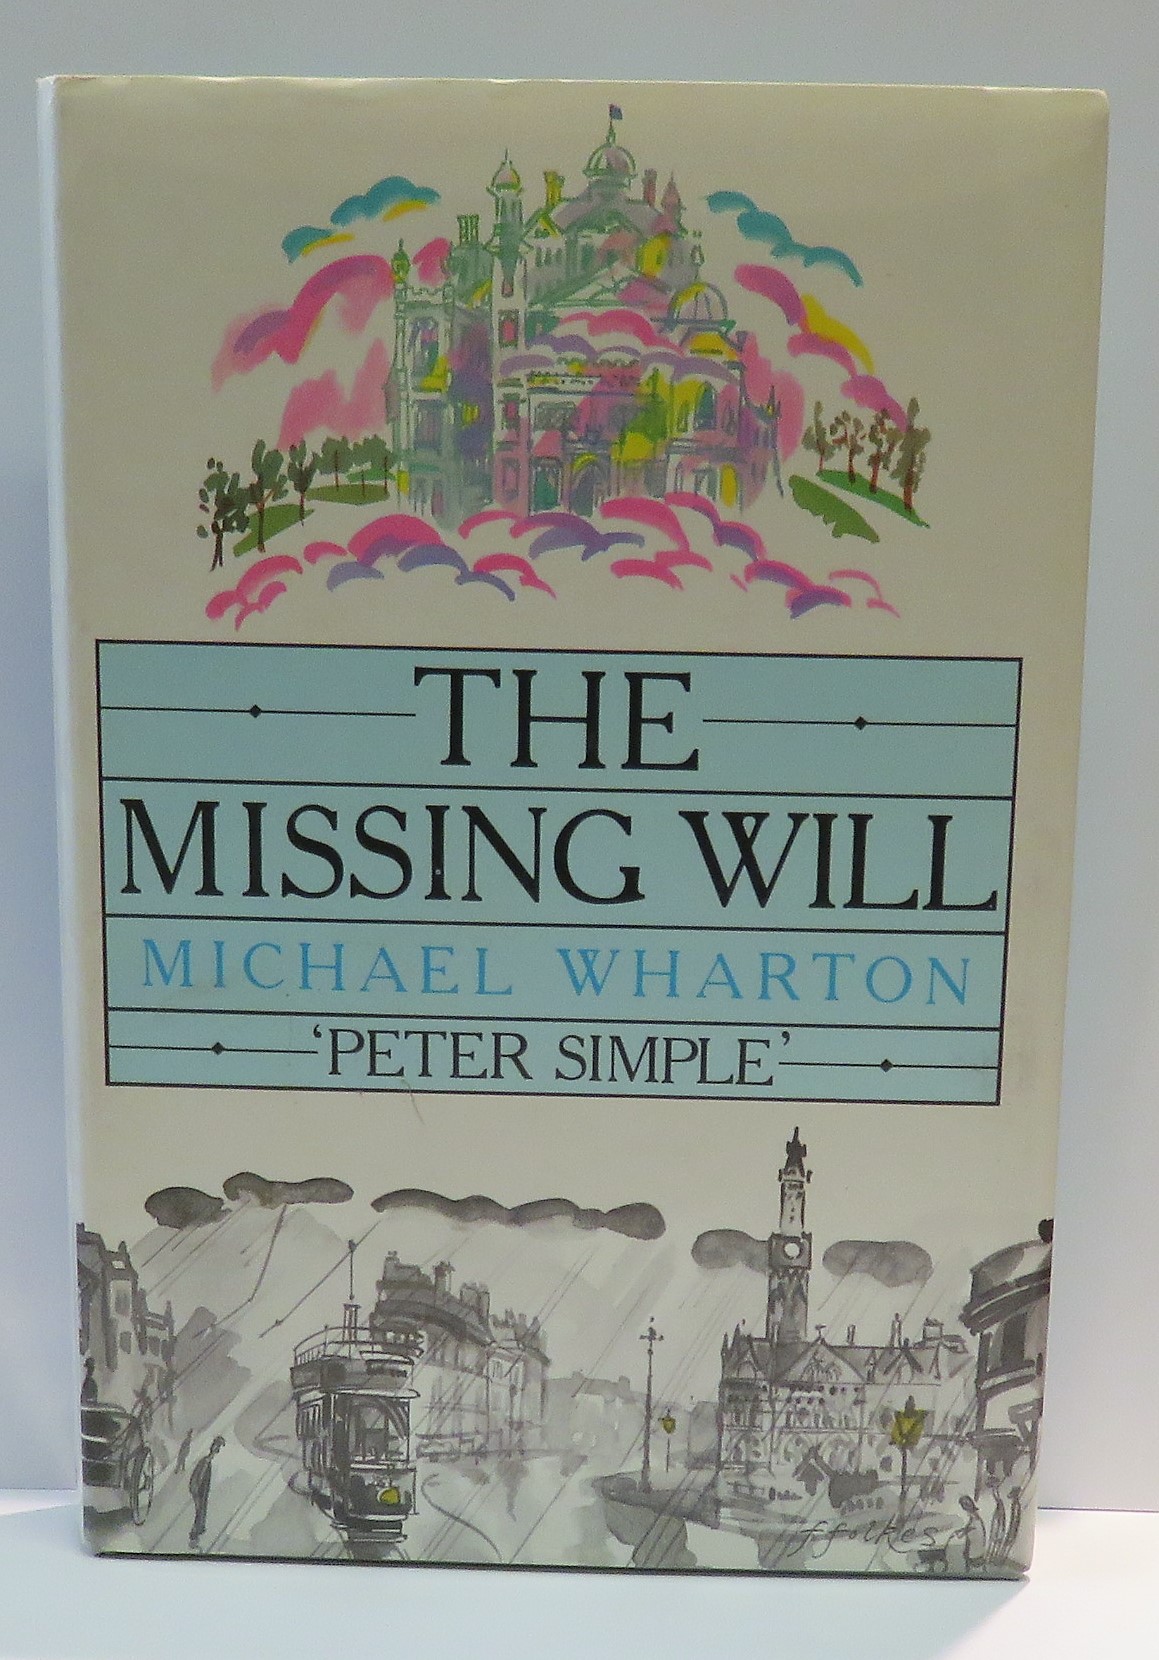 The Missing Will